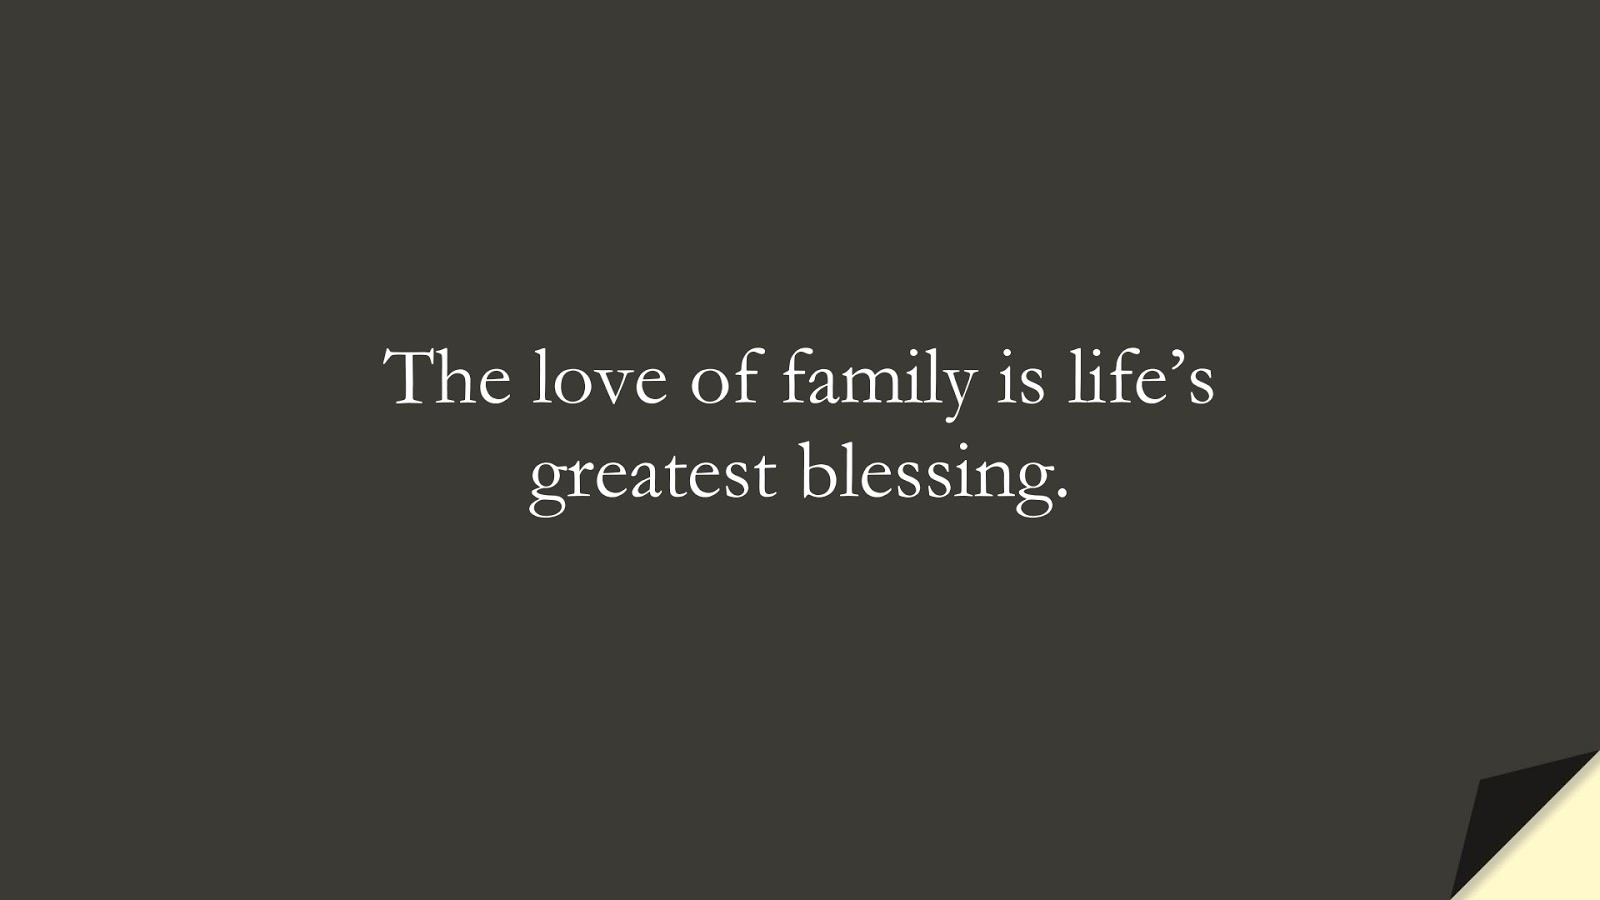 The love of family is life’s greatest blessing.FALSE